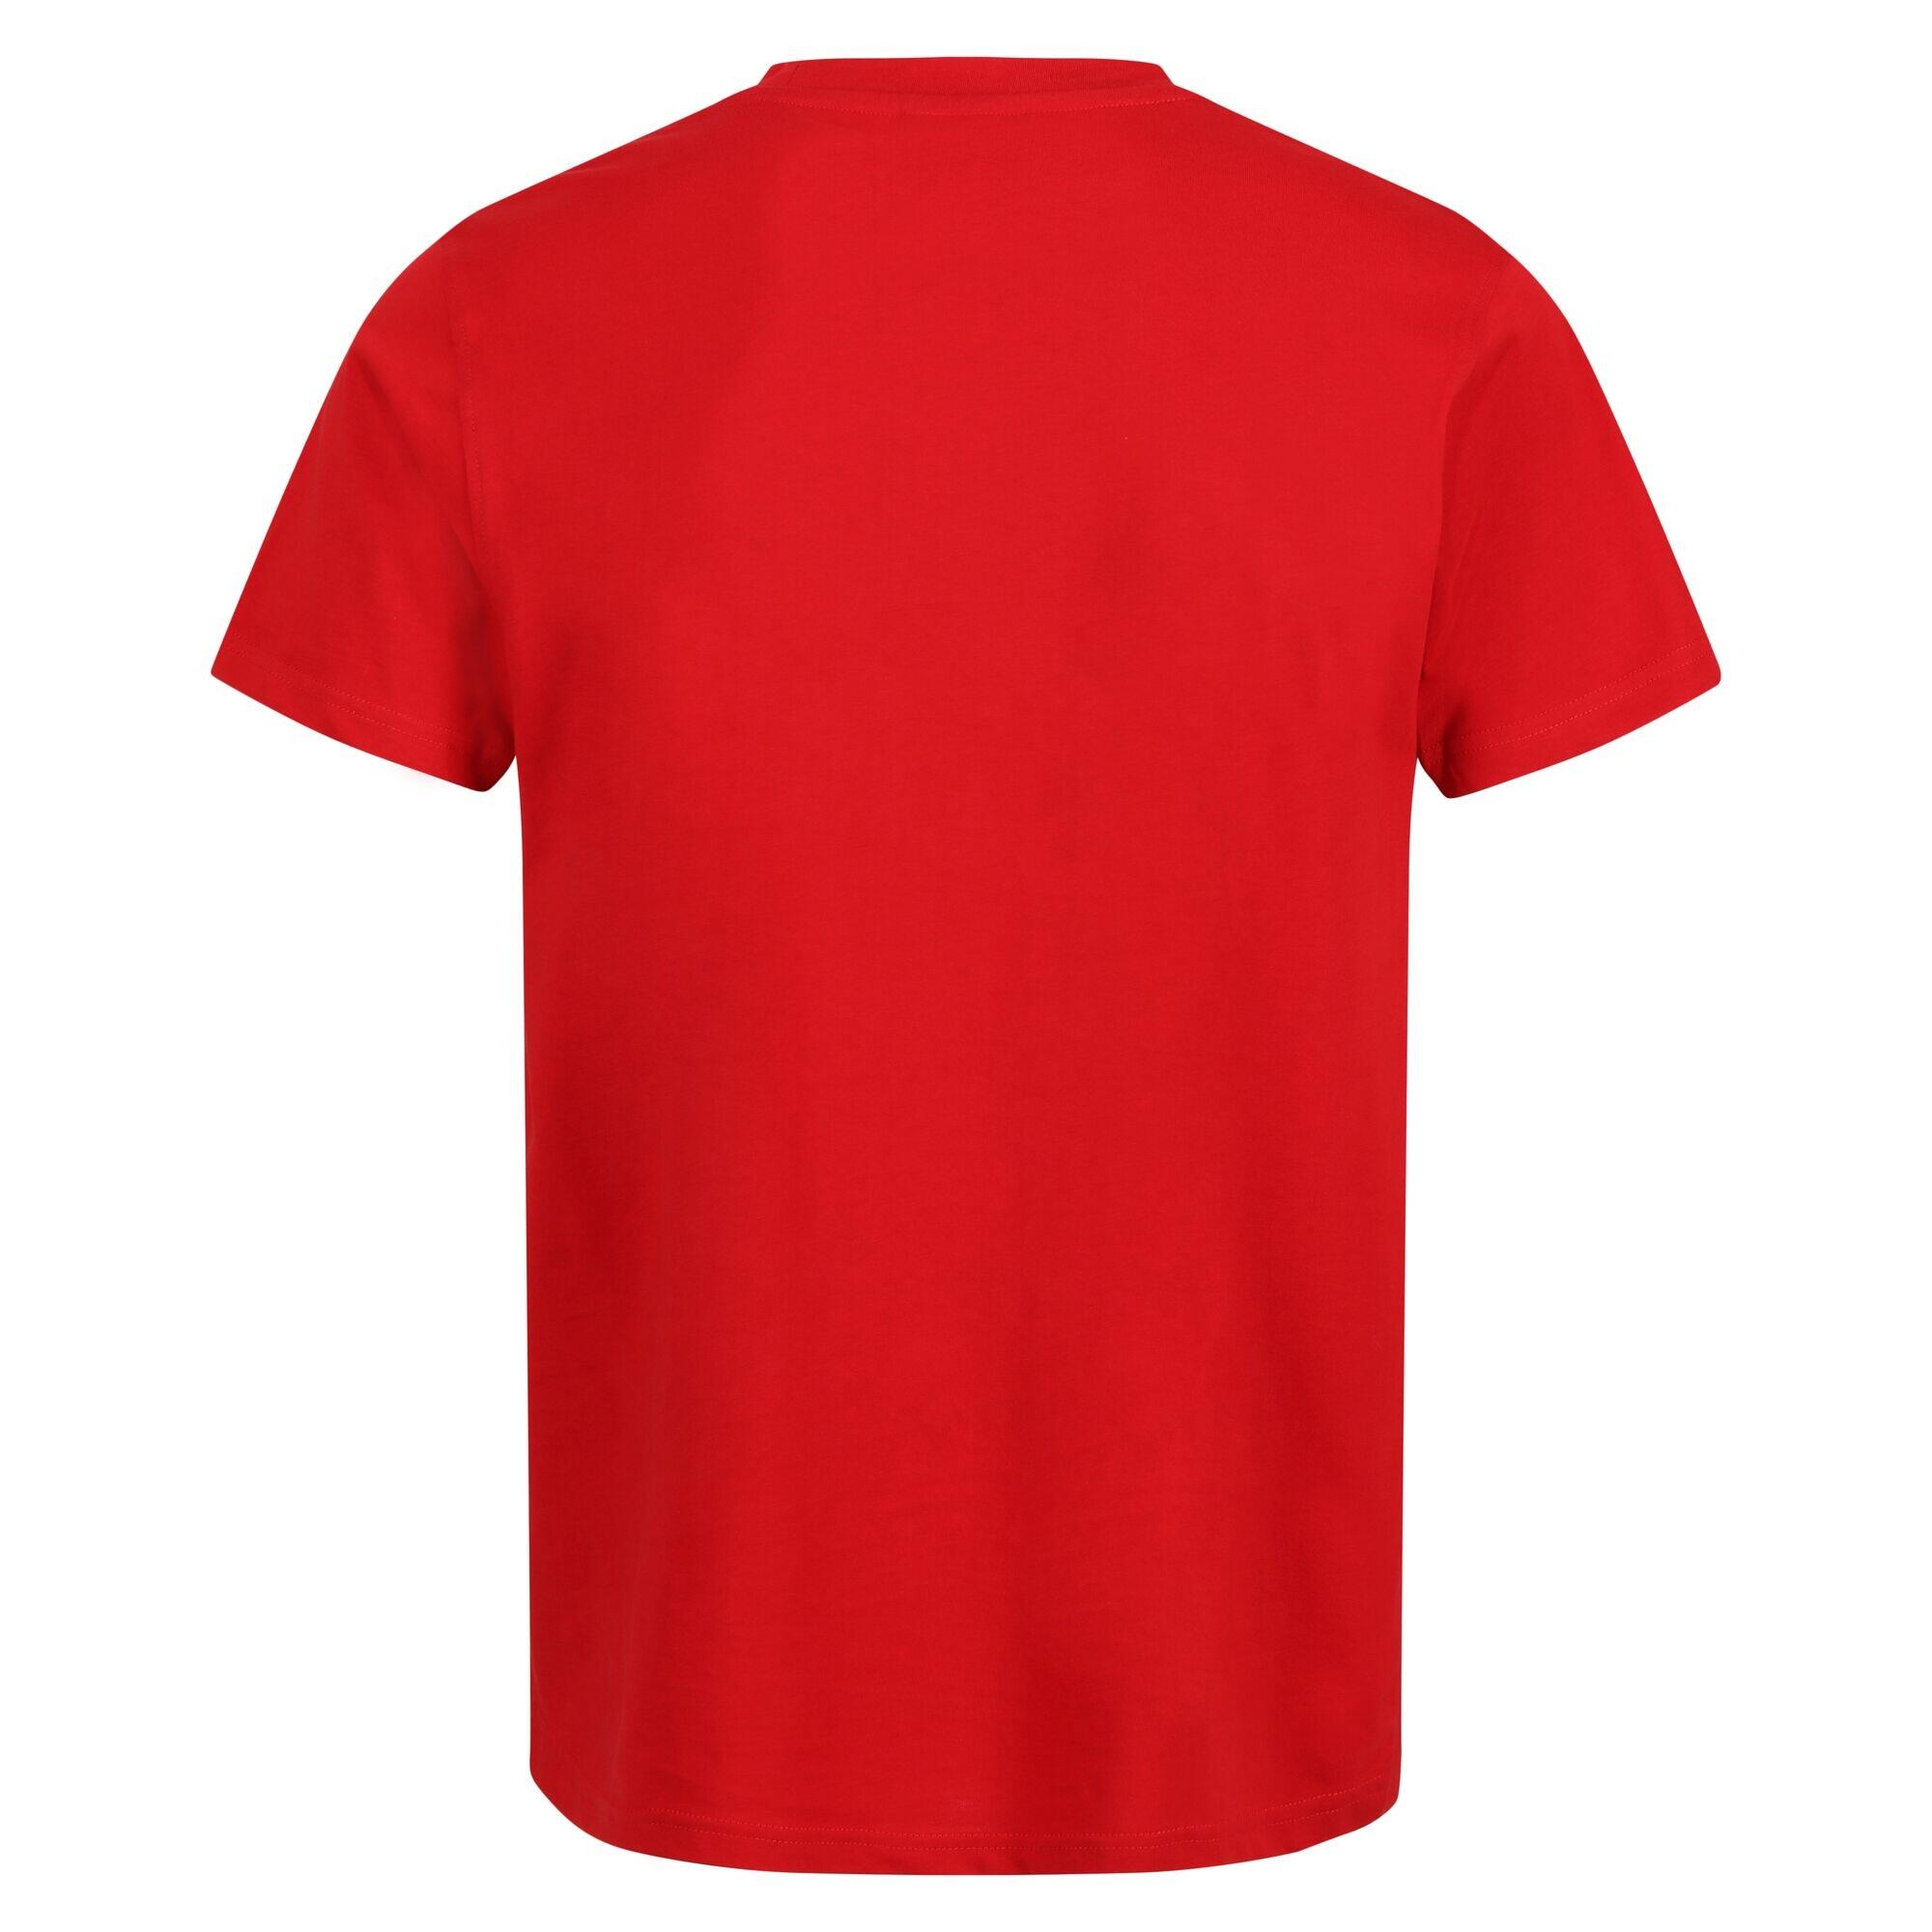 Mens Pro Cotton Soft Touch TShirt (Classic Red) 2/5